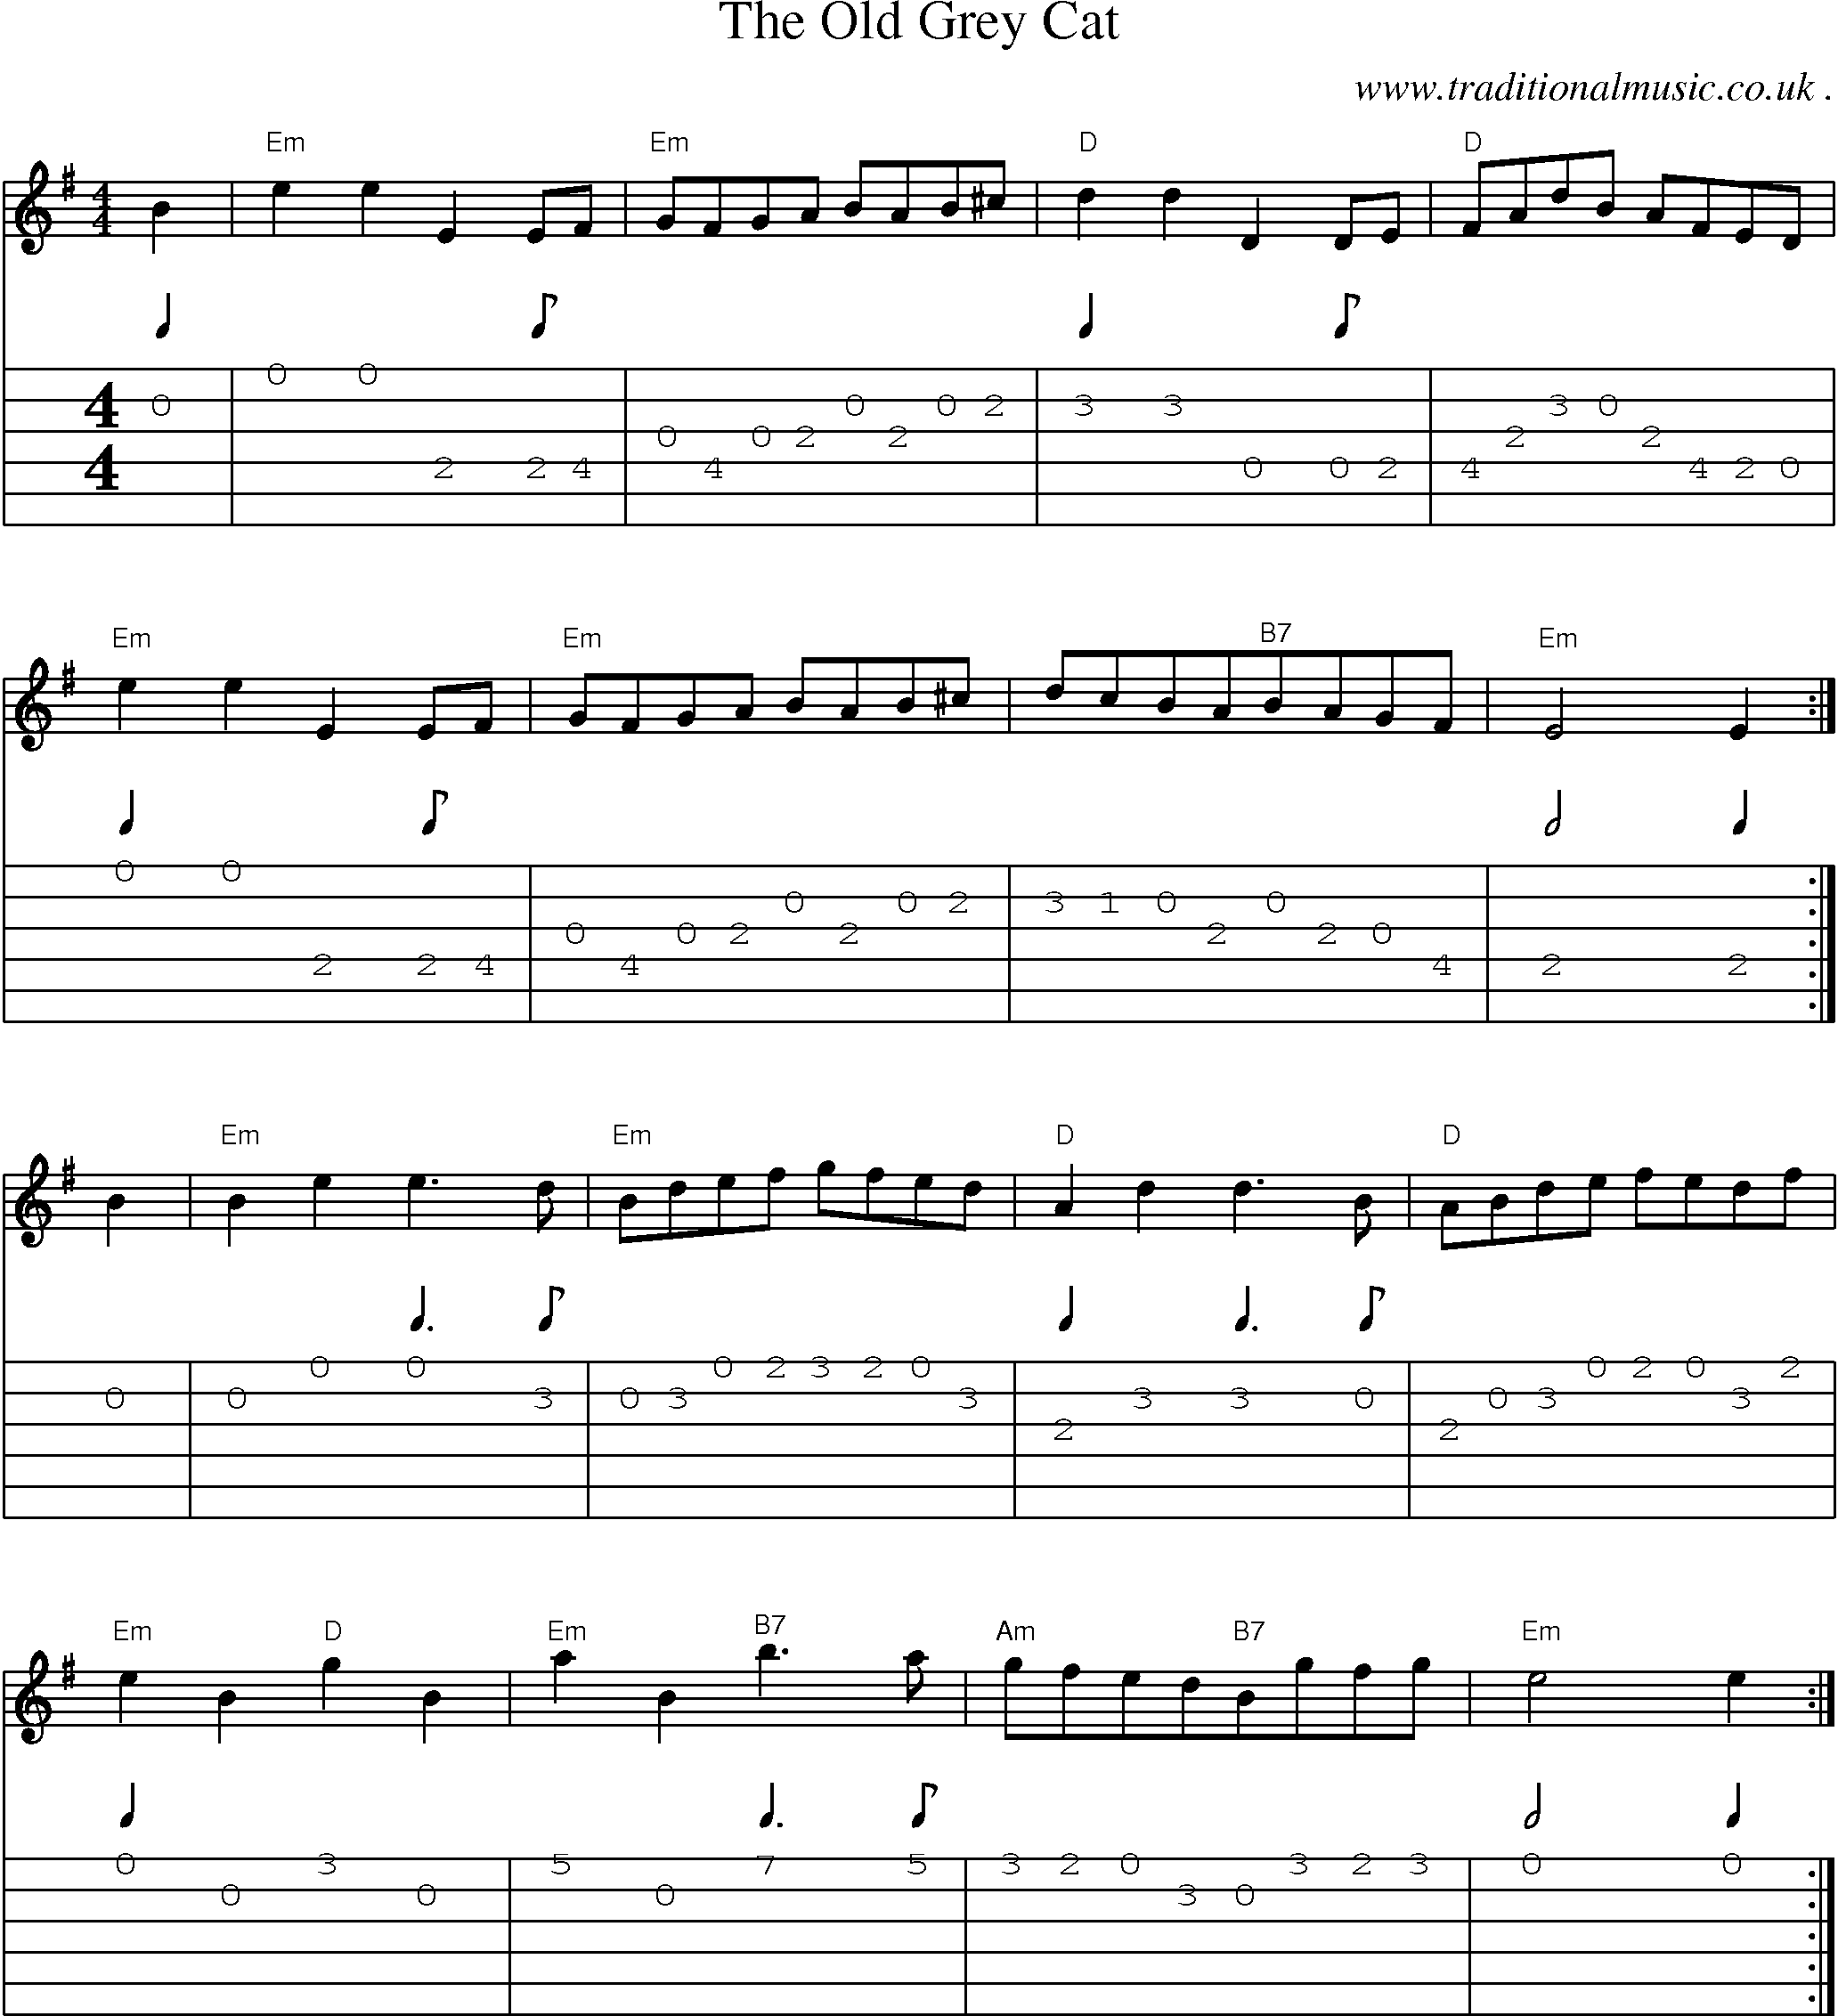 Sheet-Music and Guitar Tabs for The Old Grey Cat